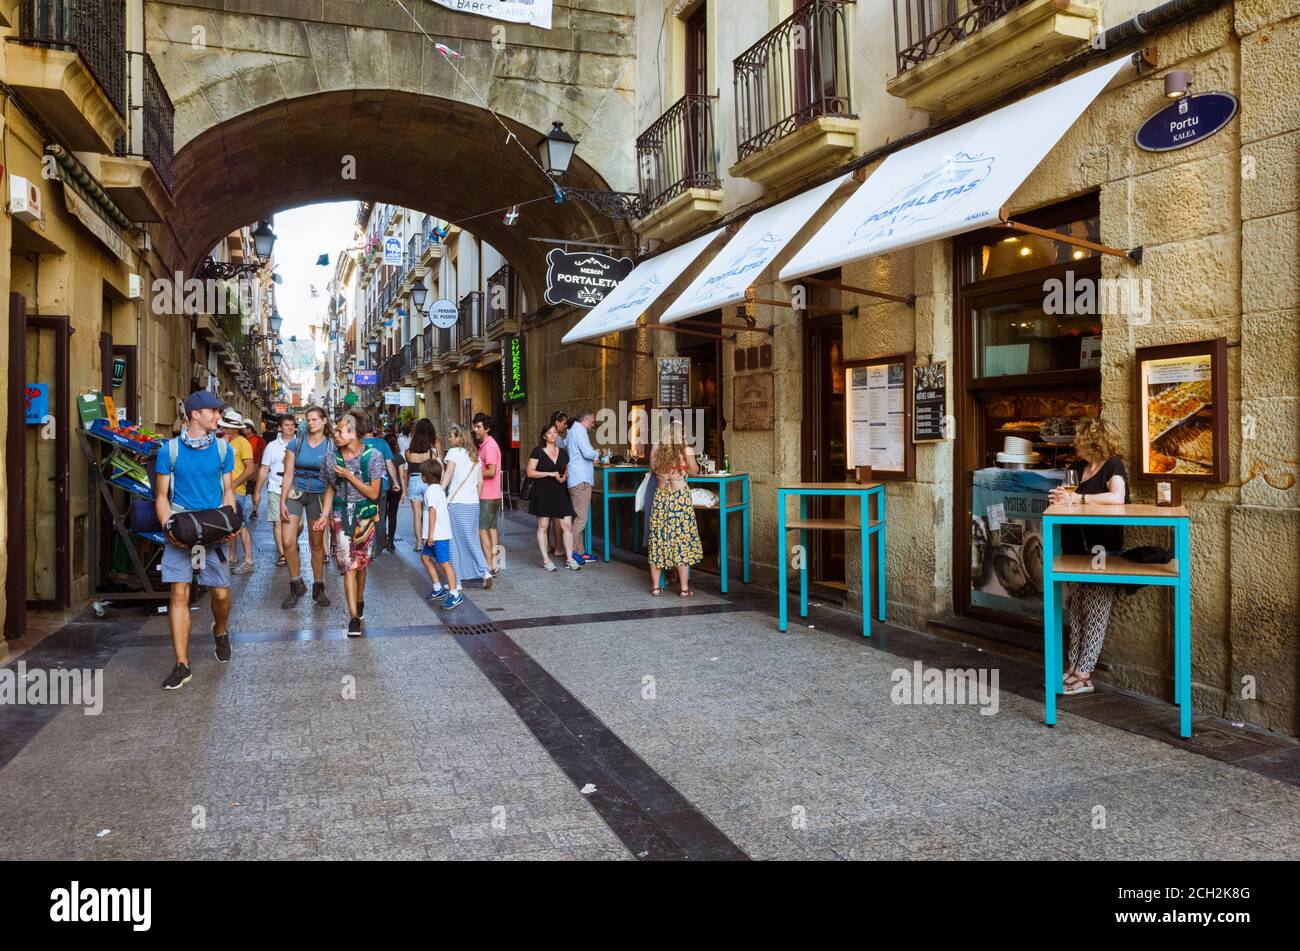 Donostia, Gipuzkoa, Basque Country, Spain - July 15th, 2019 : Passersby in the Alde Zaharra old town. Stock Photo